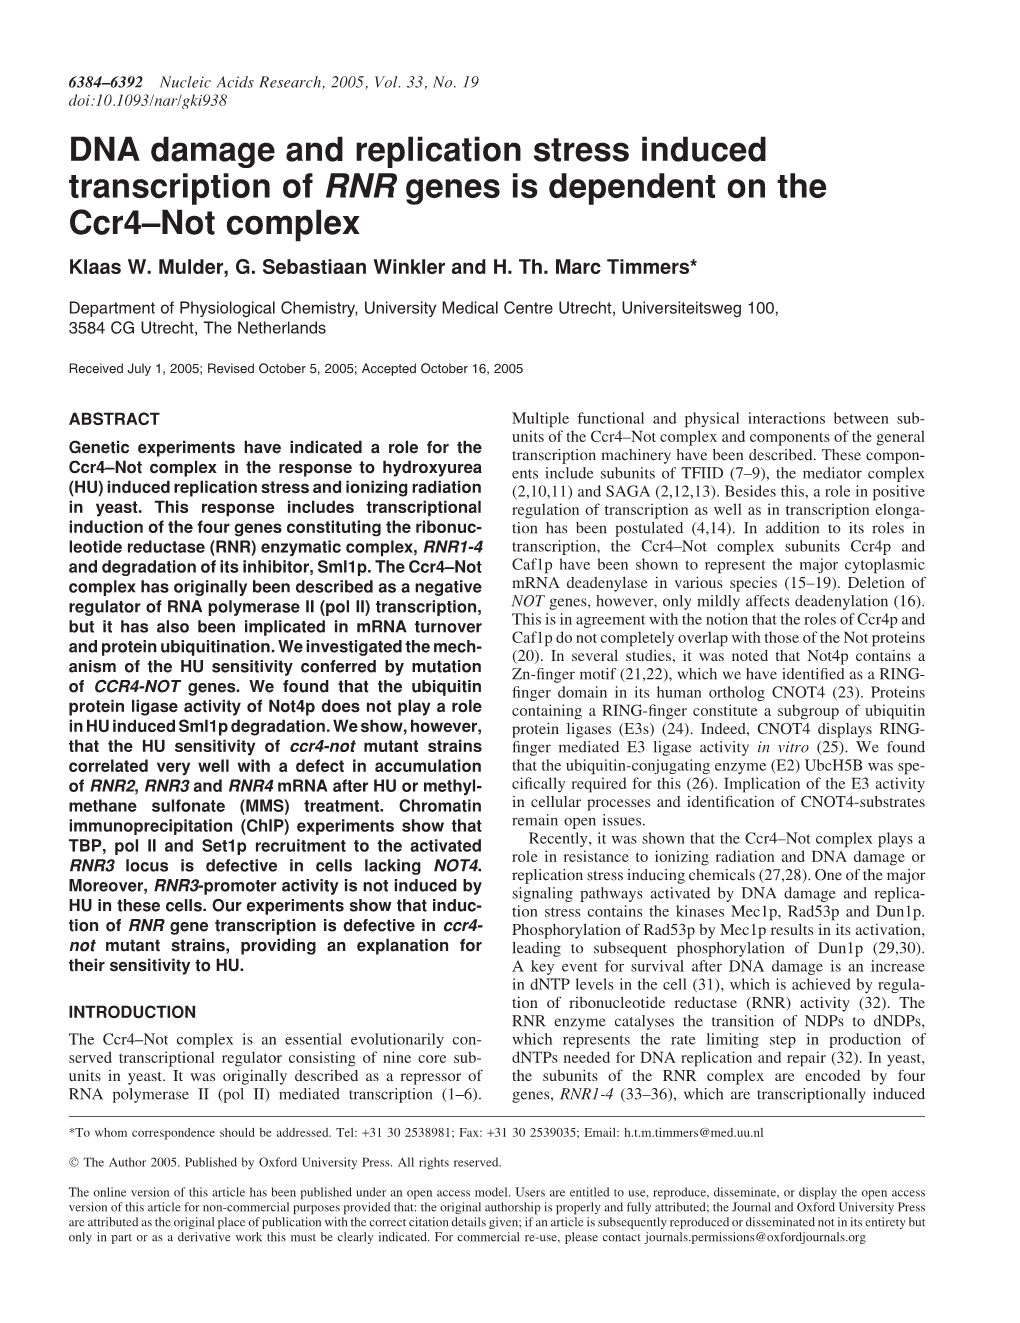 DNA Damage and Replication Stress Induced Transcription of RNR Genes Is Dependent on the Ccr4–Not Complex Klaas W